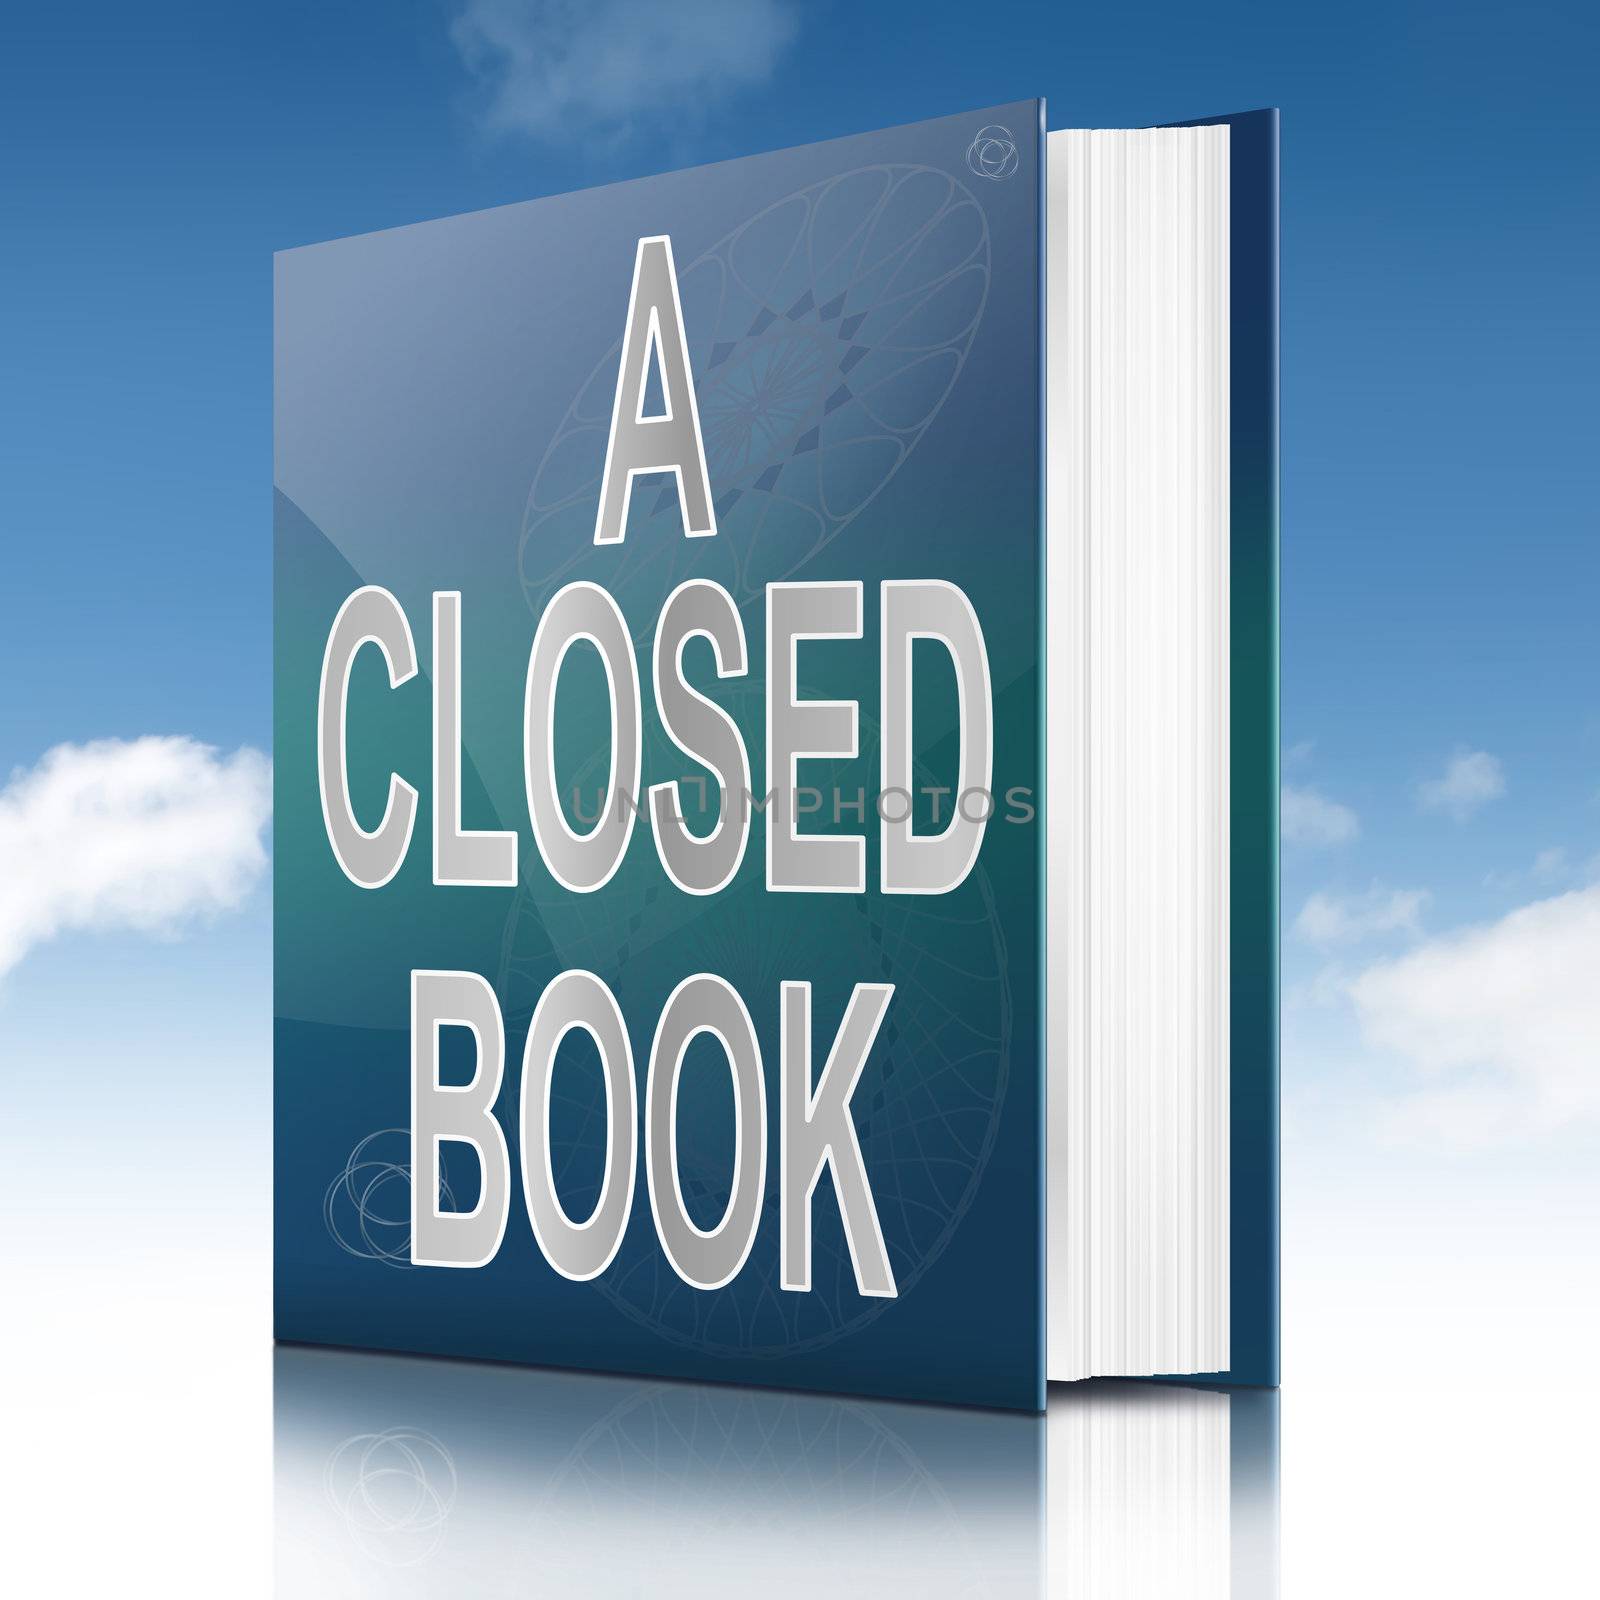 Illustration depicting a book with a closed book concept title. Sky background.